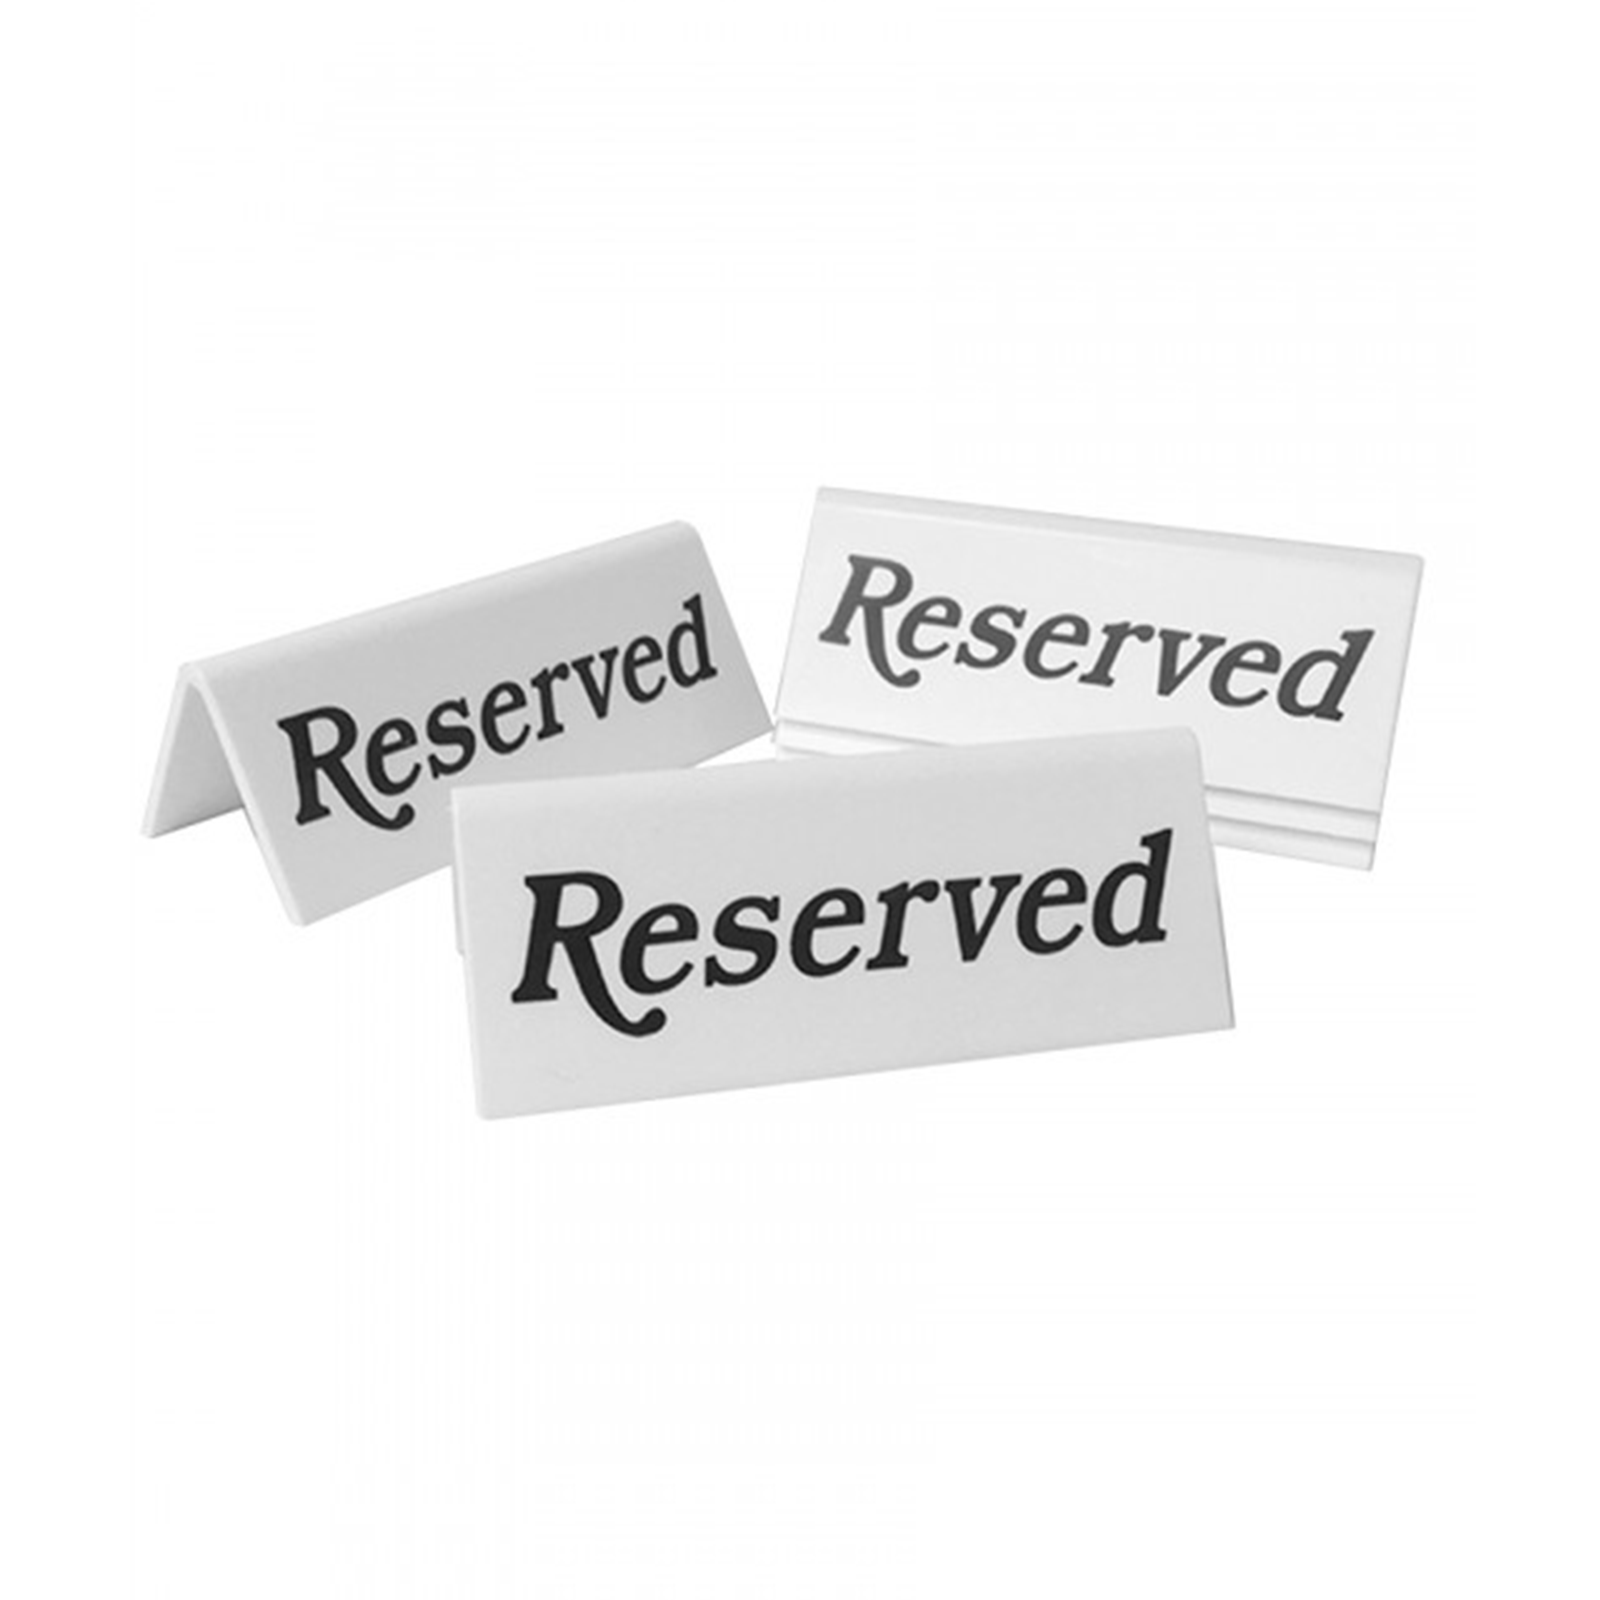 Reserved table tent notices. Pack of 5 (Black / White)